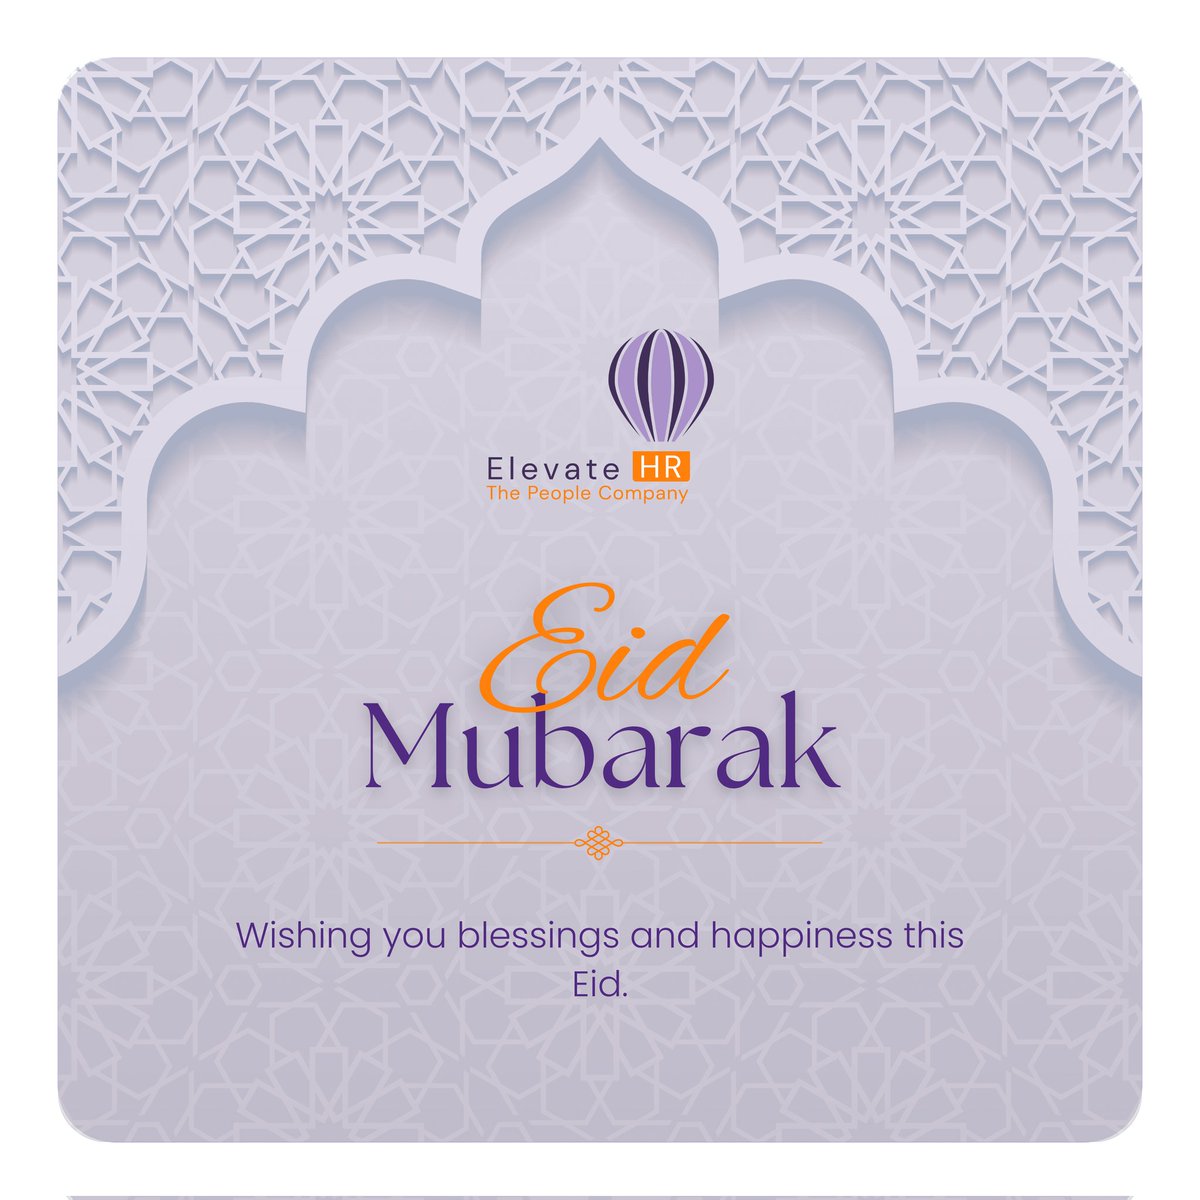 Wishing our Muslim brothers and sisters a Happy Idd ul Fitr filled with blessings and happiness. 

Eid Mubarak✨️

#IddulFitr #EidMubarak #Eid2024 #ThePeopleCompany